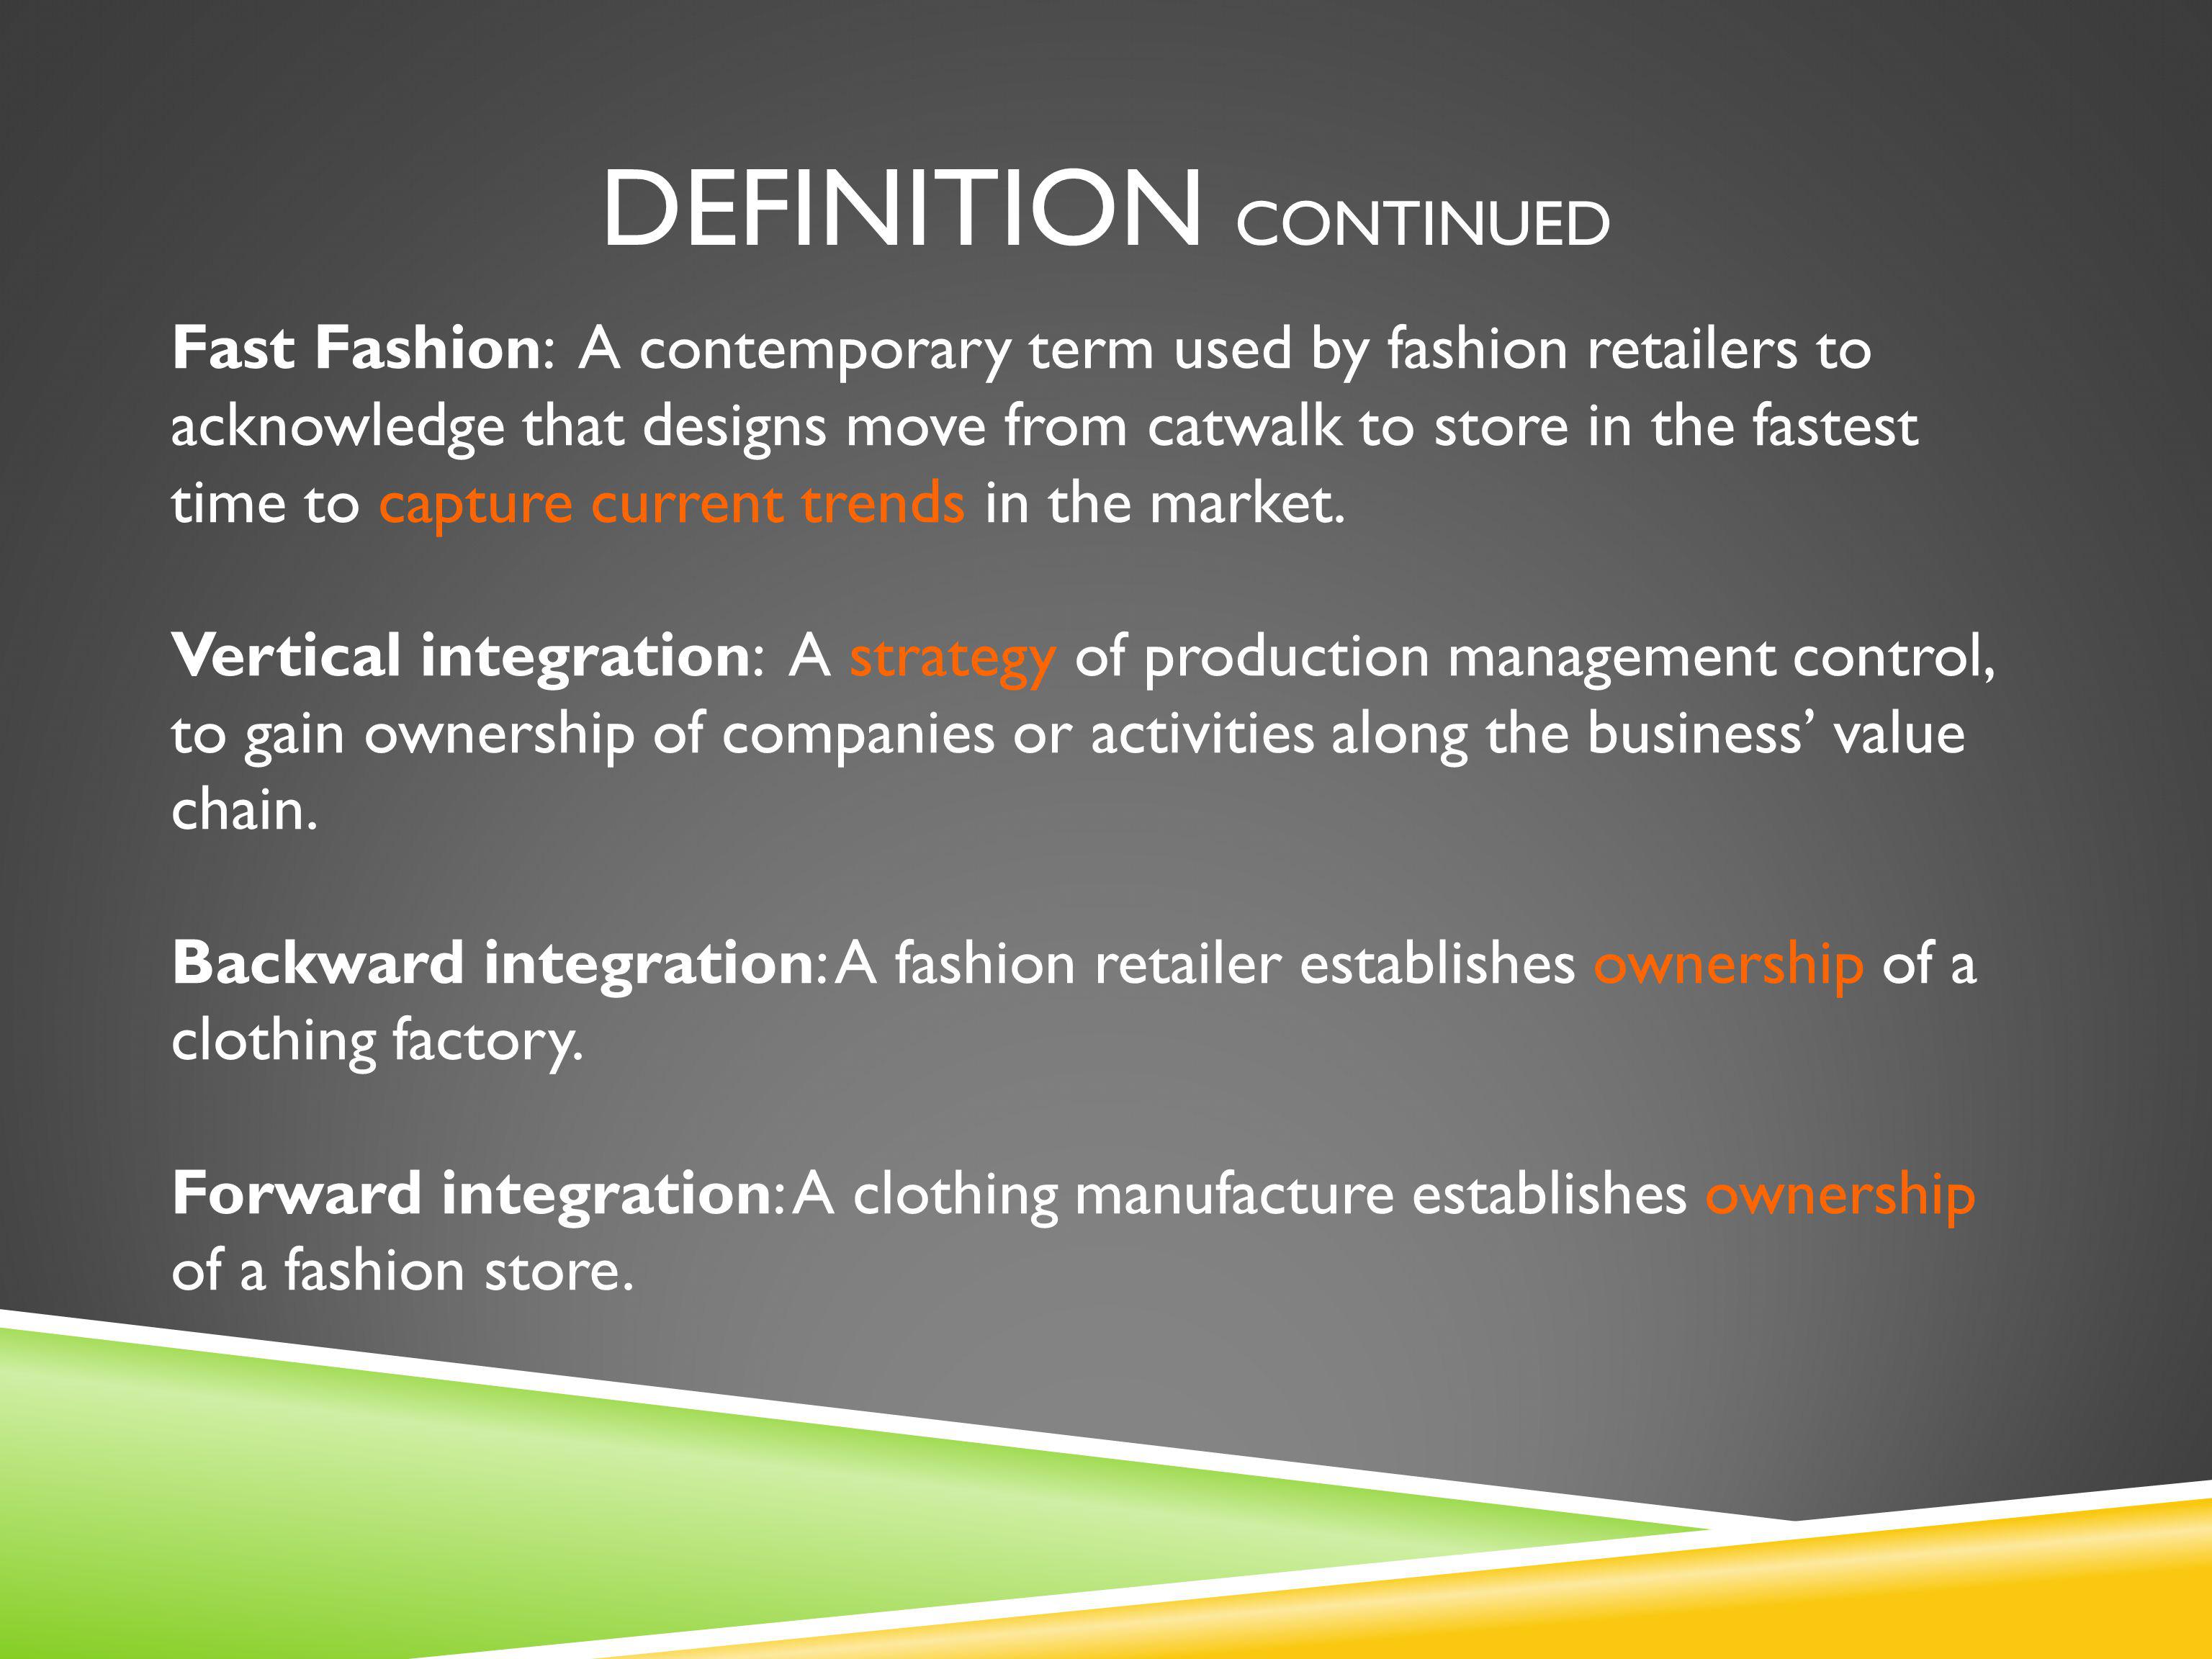 Outsourcing Versus Vertical Integration in the Fast Fashion Apparel  Industry: A Case Study of Inditex, H&M, and Gap Presented by Emily Zhang-  Economics. - ppt video online download